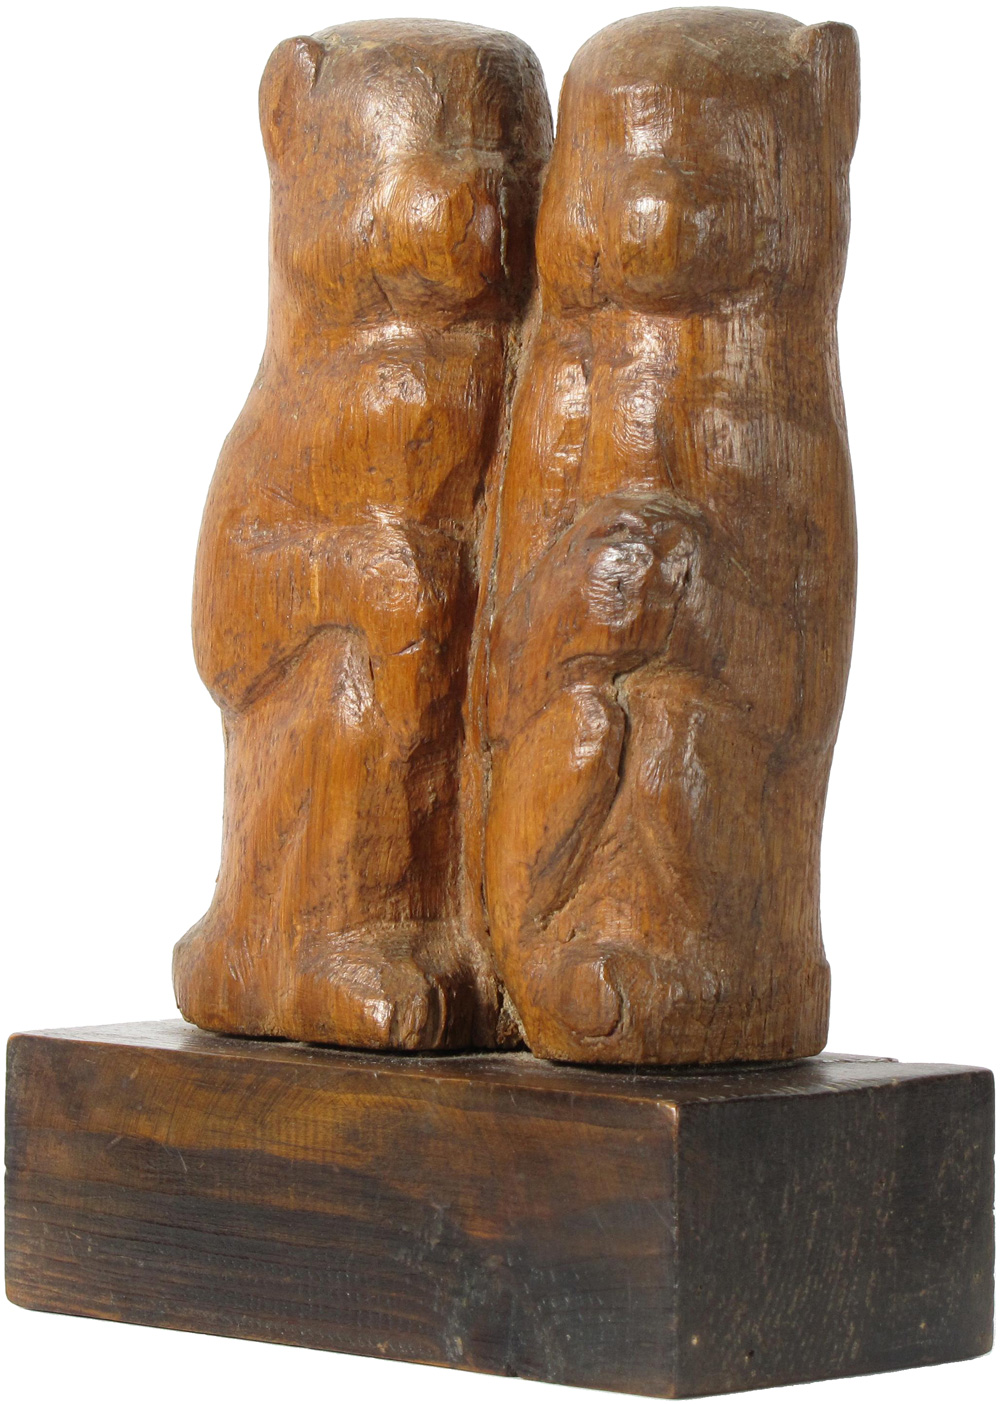 Joseph Constant - Two Monkeys - Wood Engraved Sculpture - יוסף קונסטנט - פסלי חיות - Back To List of Original Paintings and Sculptures